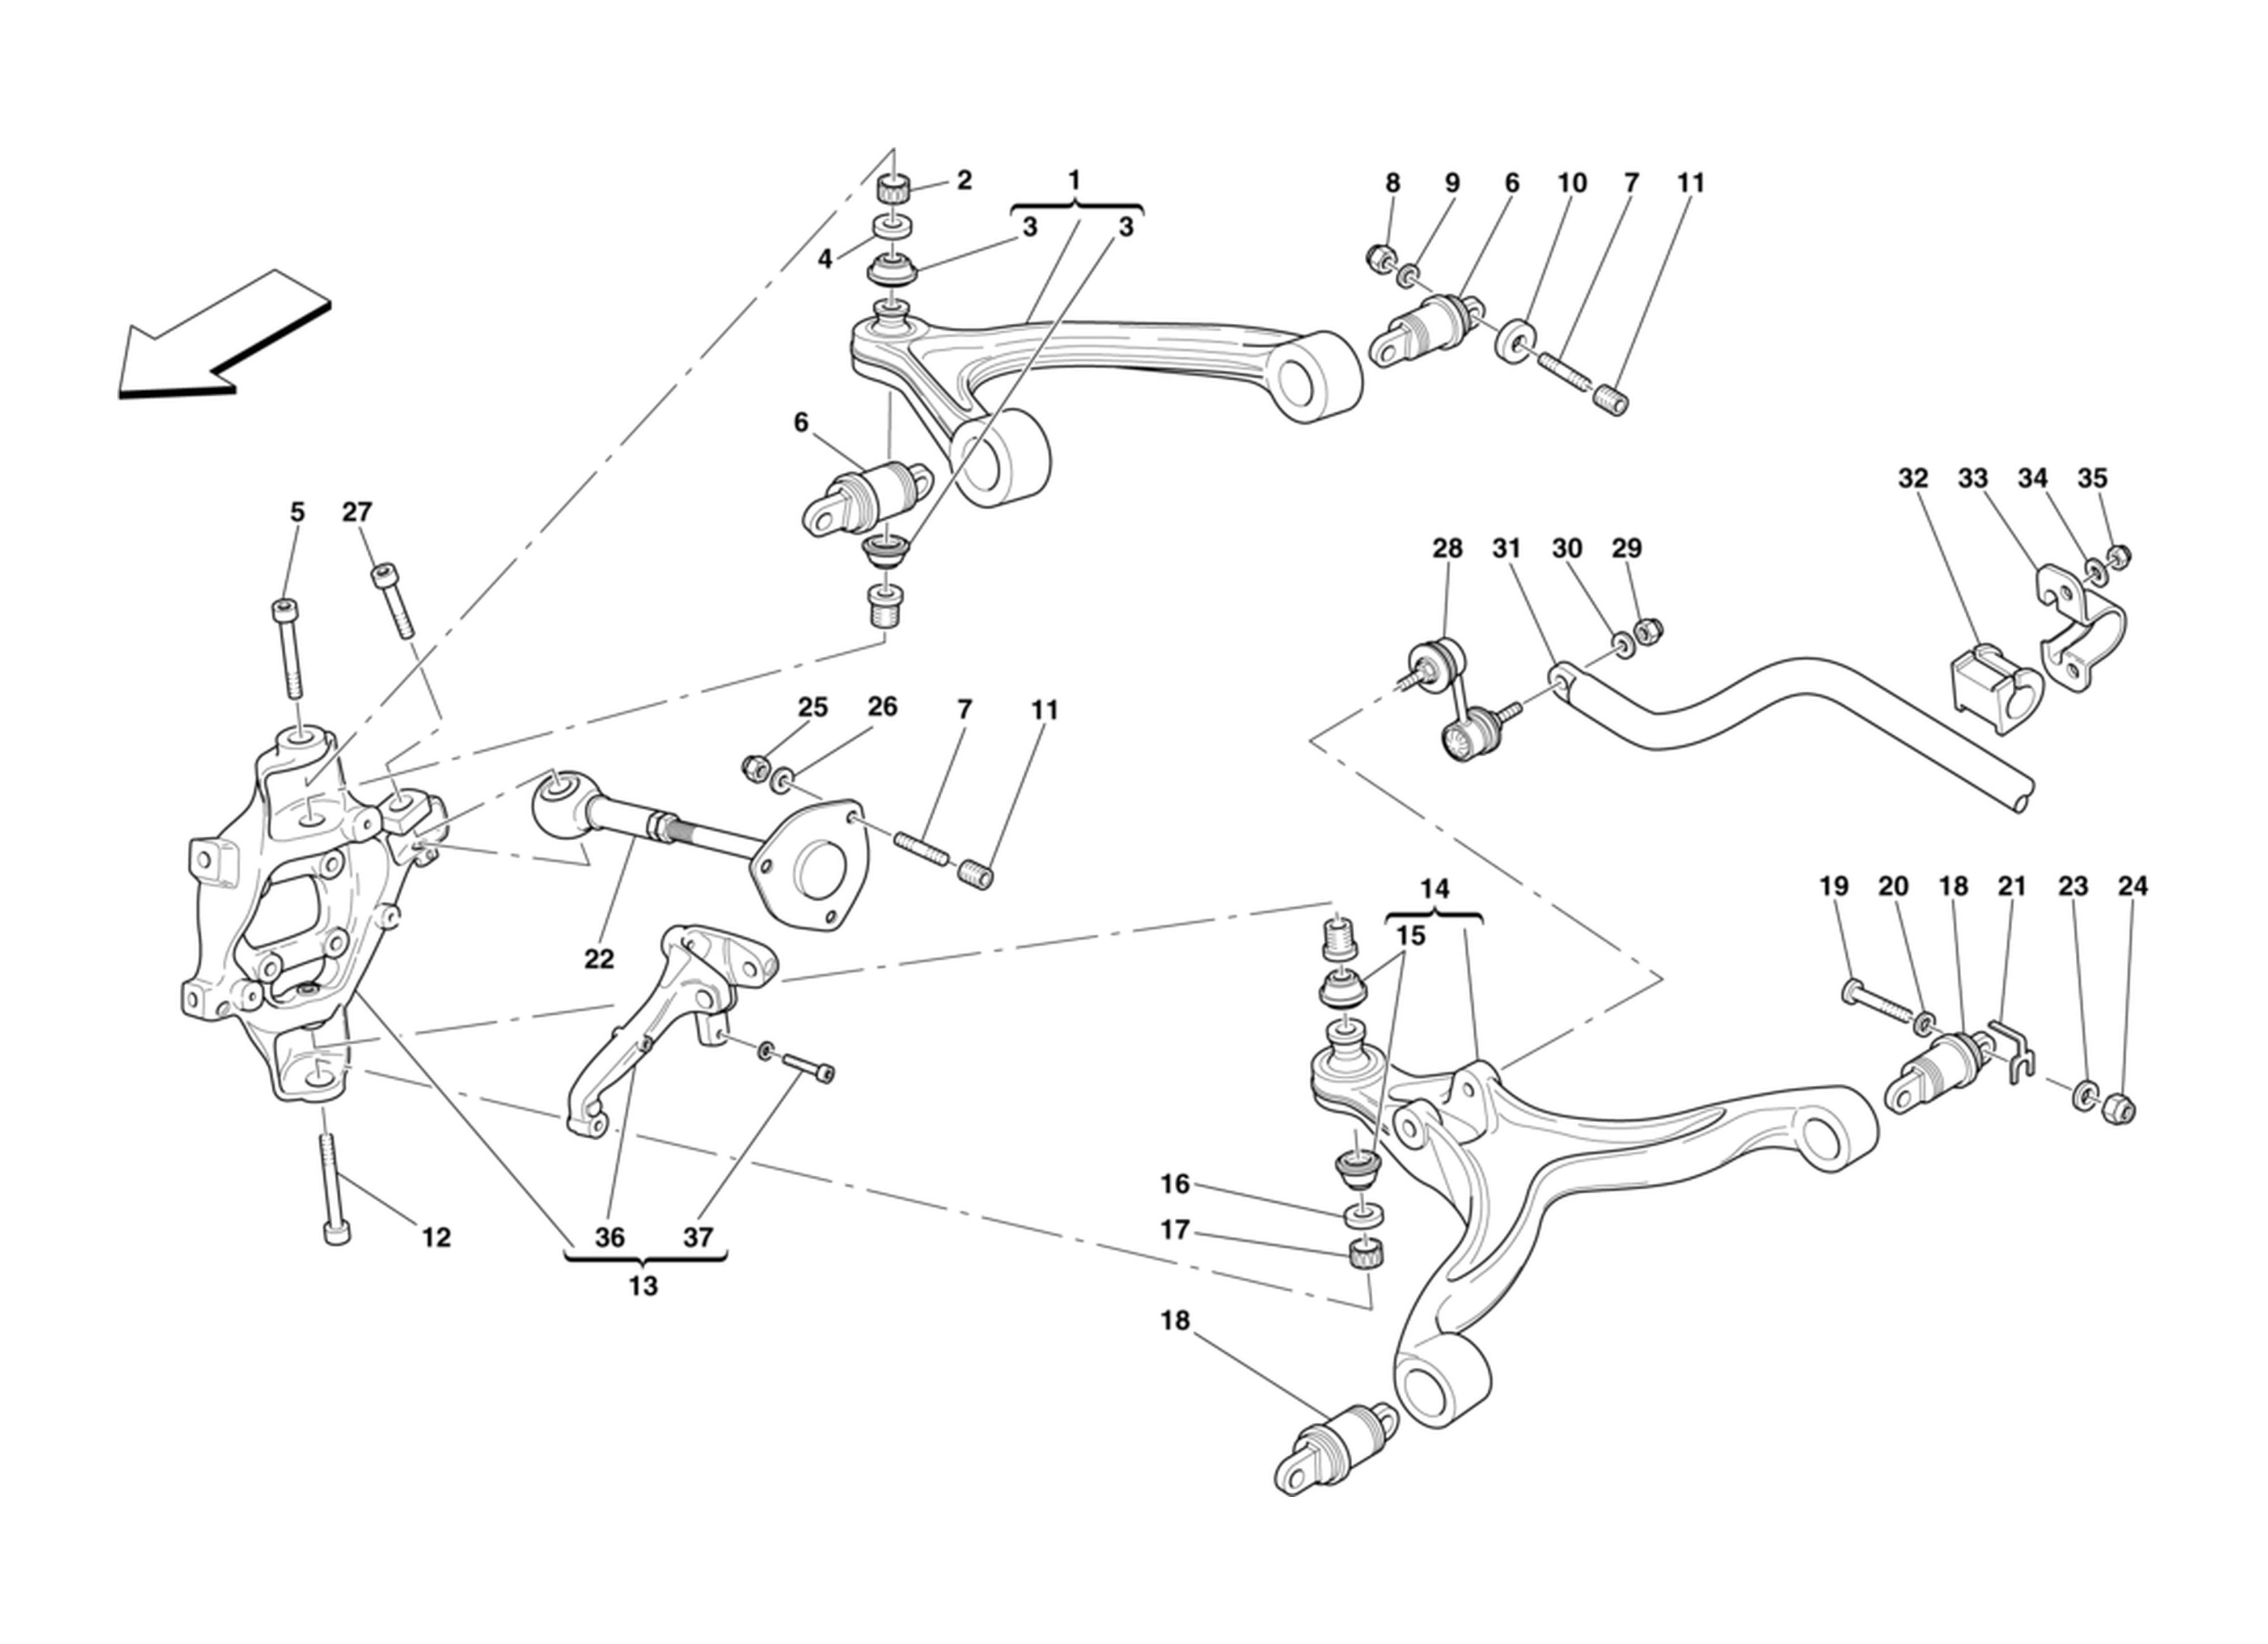 Schematic: Rear Suspension Arms And Stabiliser Bar